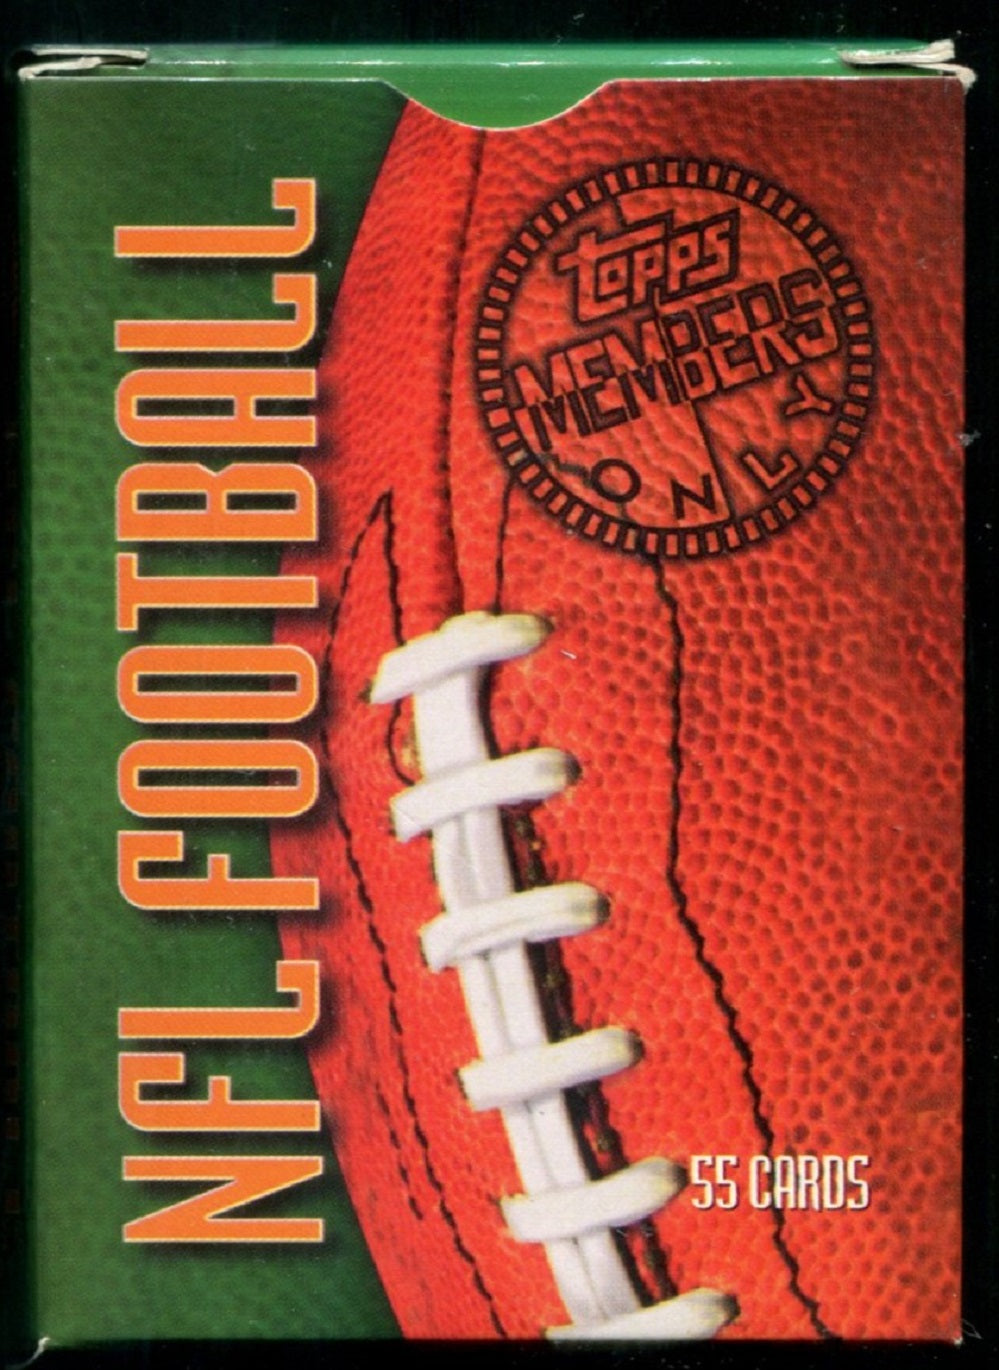 1997 Topps Stadium Club Football Members Only Factory Set (55)